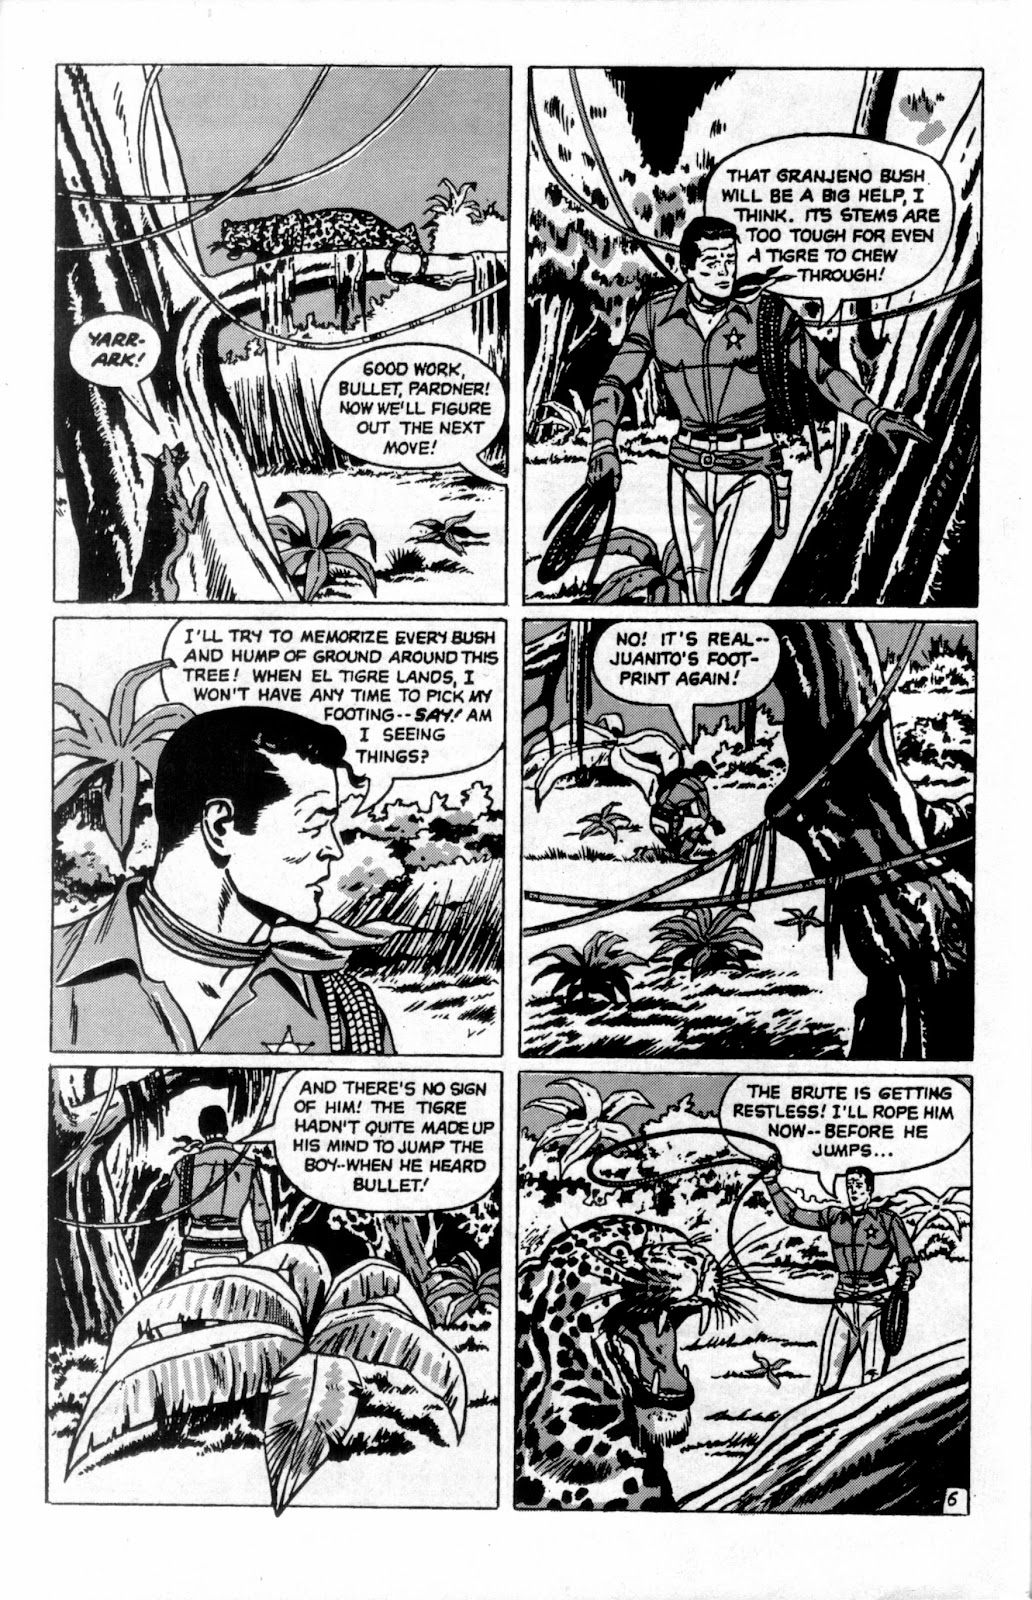 Best of the West (1998) issue 4 - Page 8